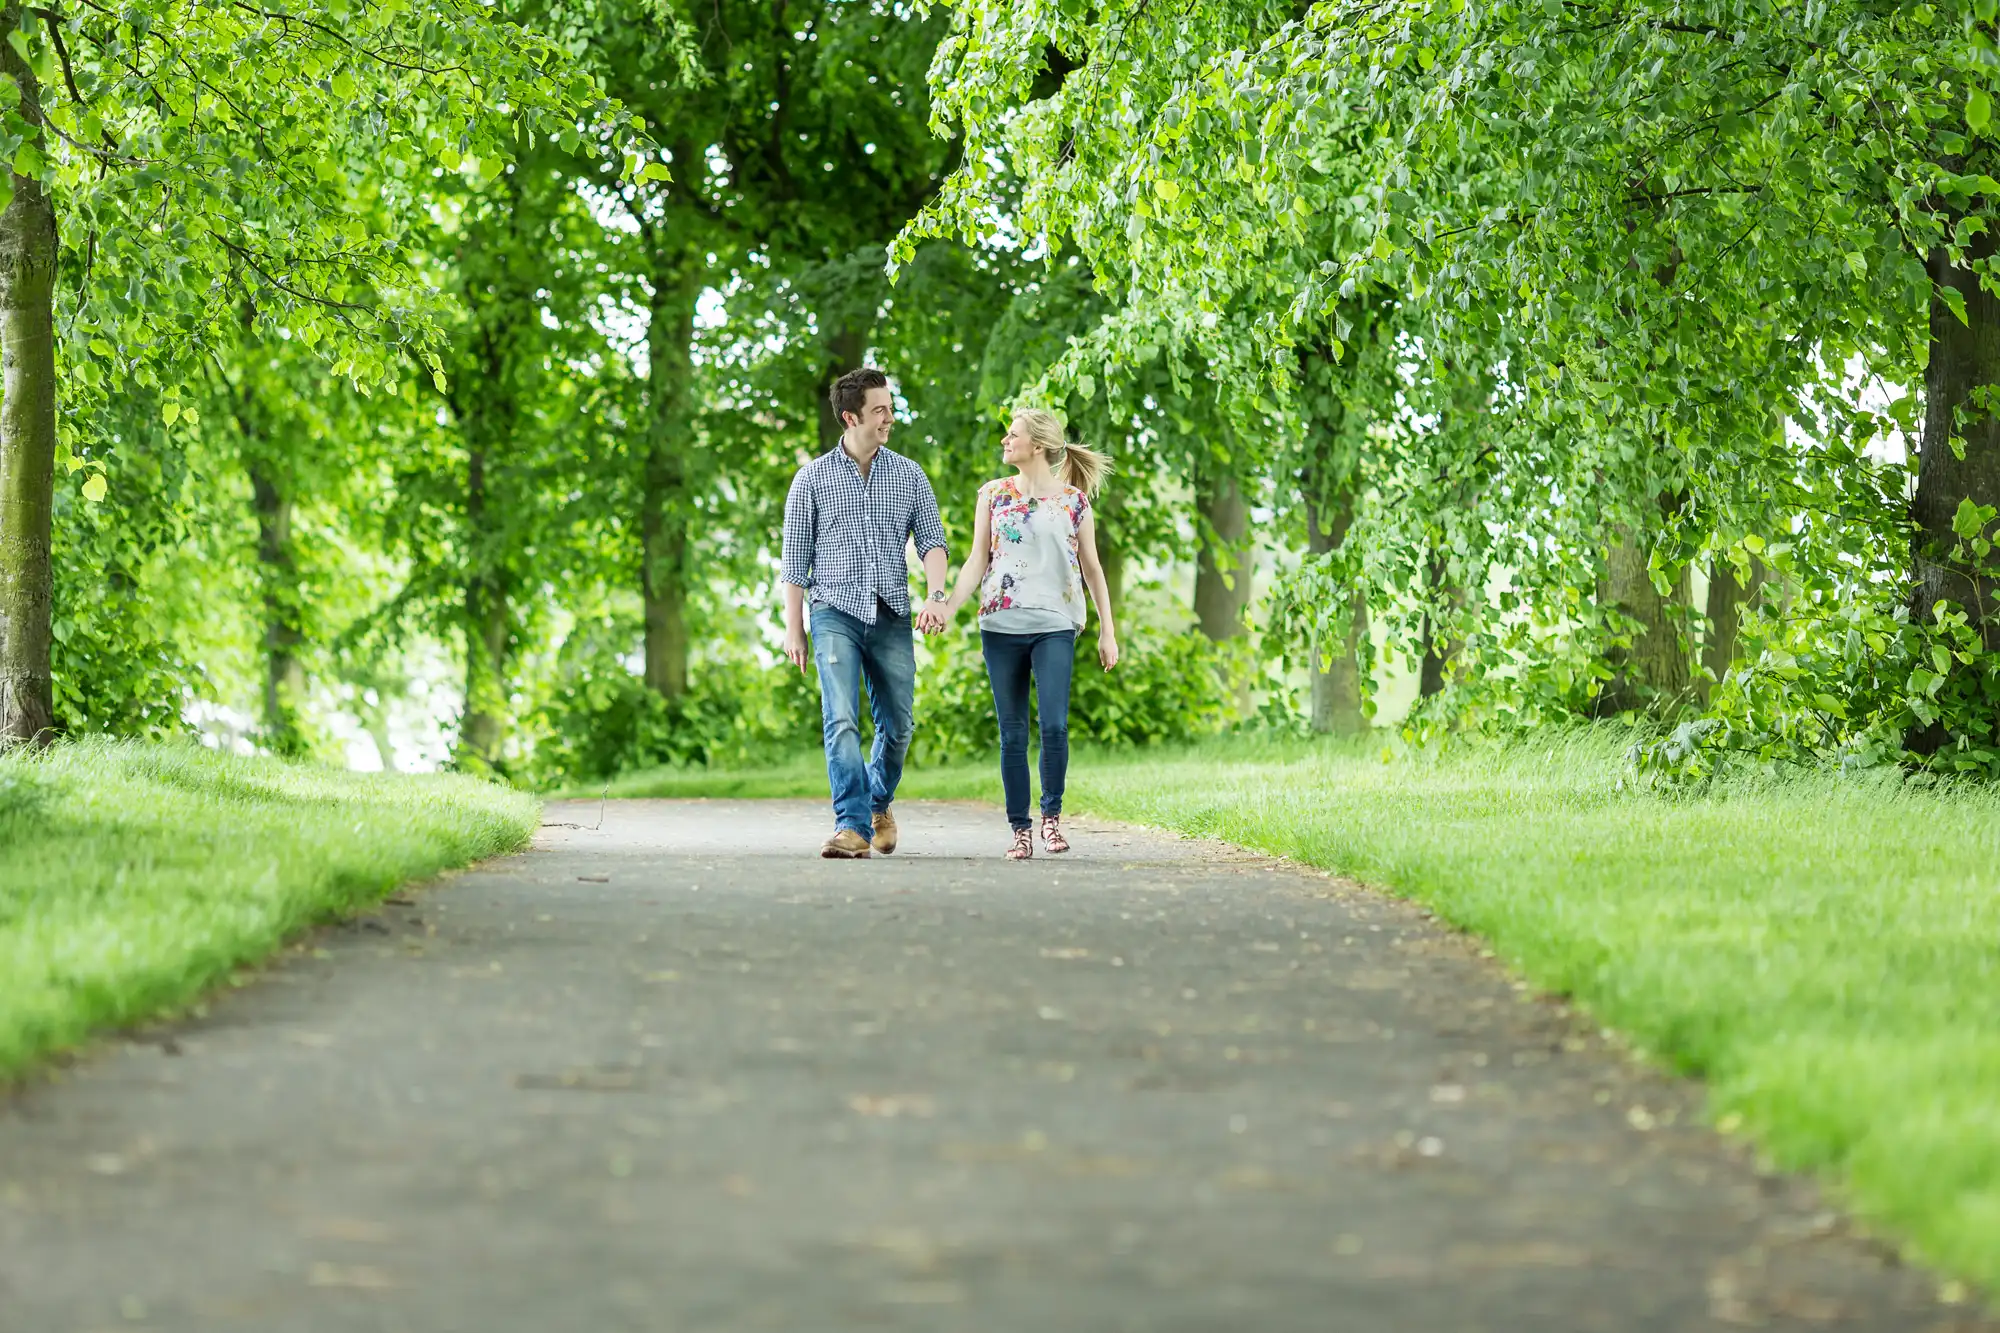 A man and a woman walking and talking on a tree-lined pathway in a park.